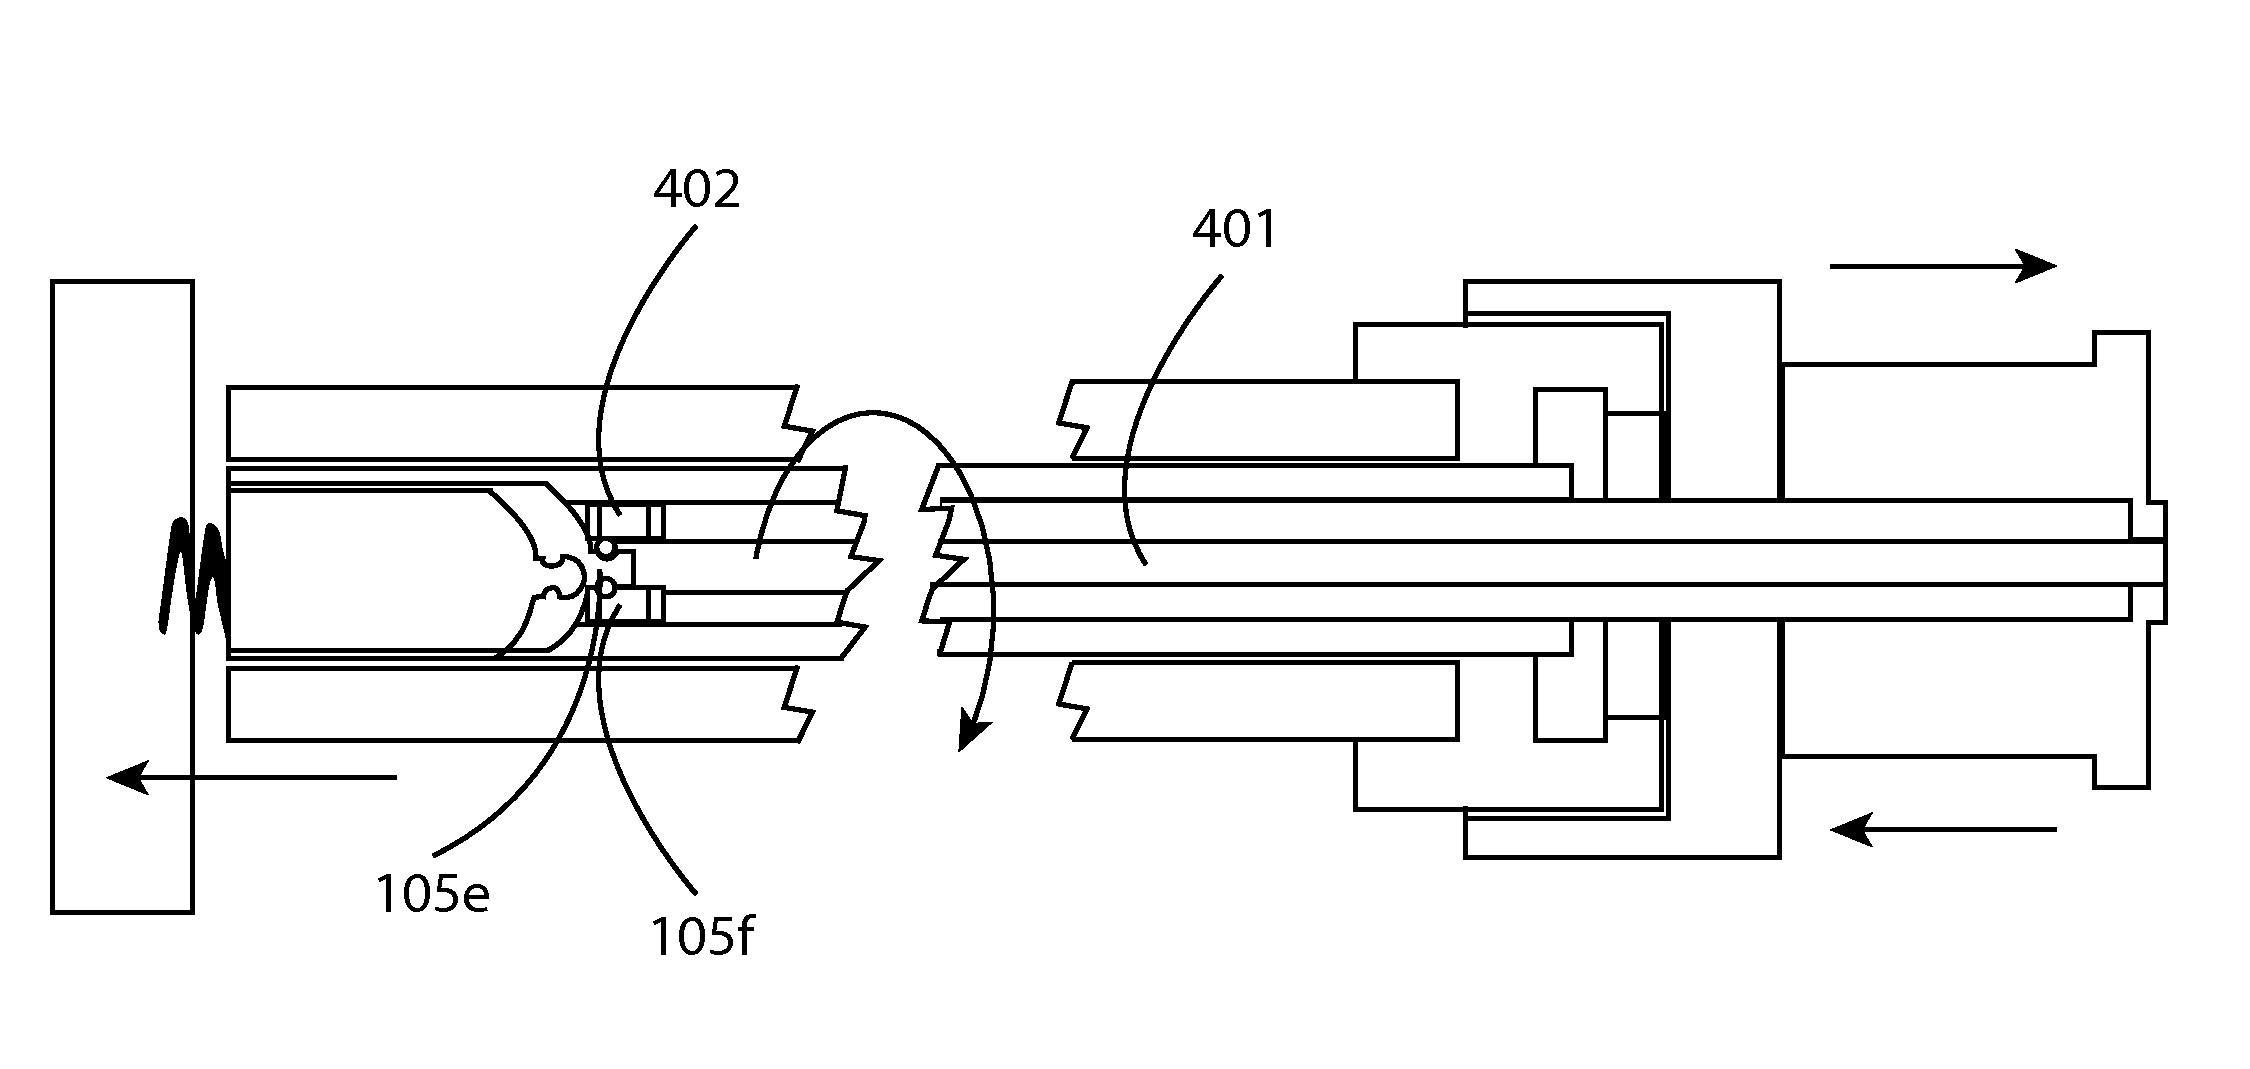 Leadless implantable device delivery apparatus